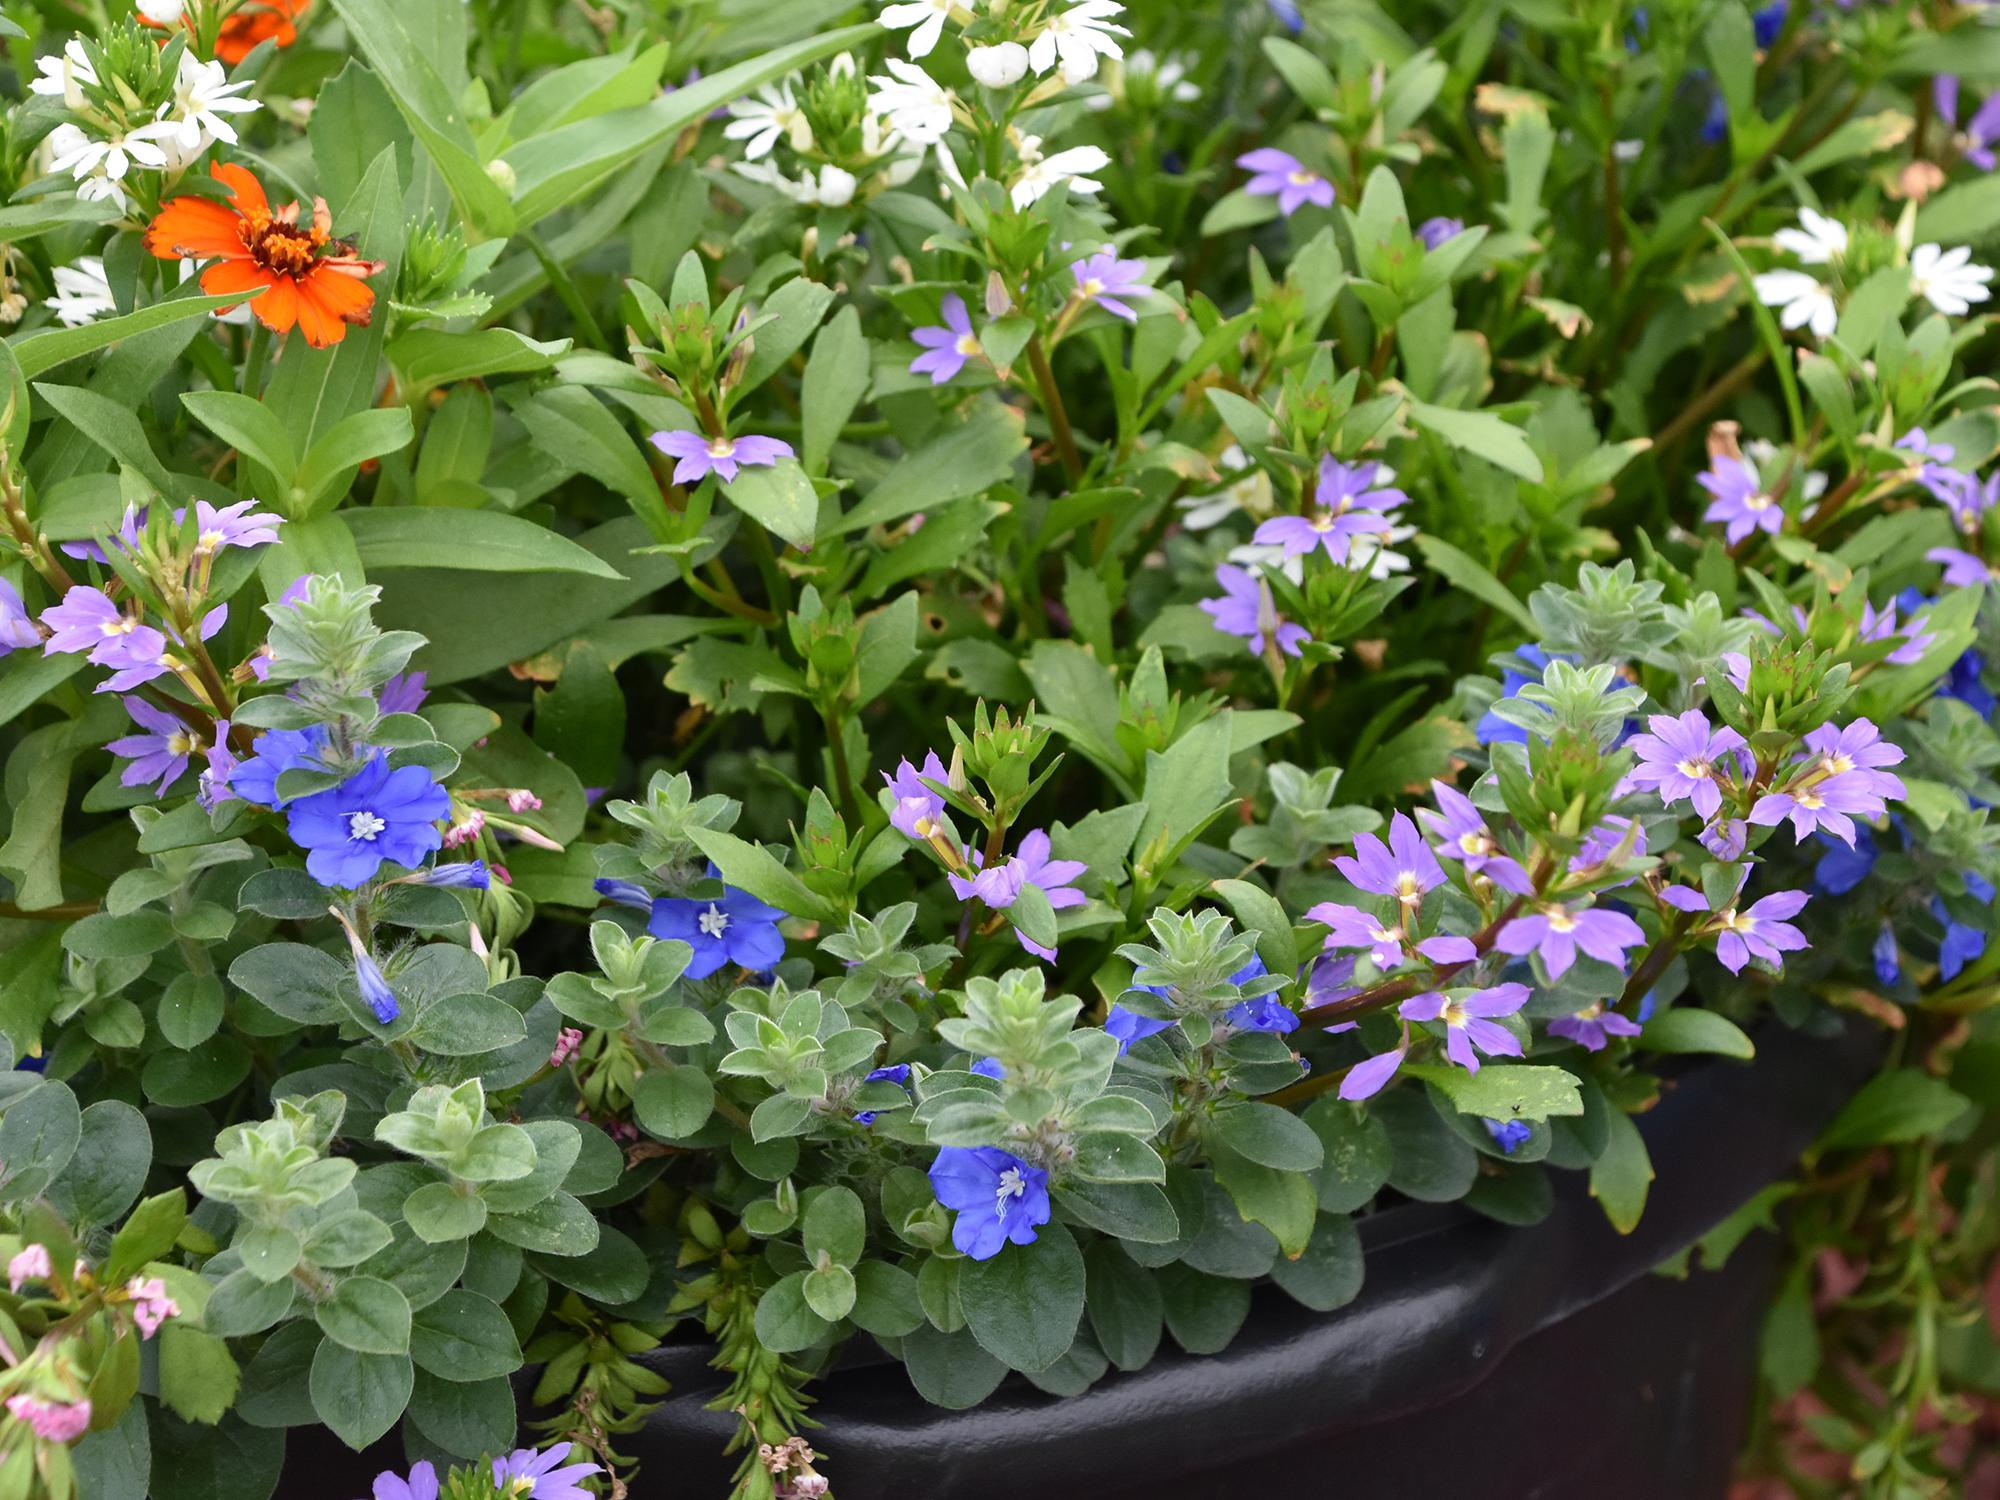 Scaevola – Tiny purple, white and orange flowers can be seen among a mass of green leaves.  